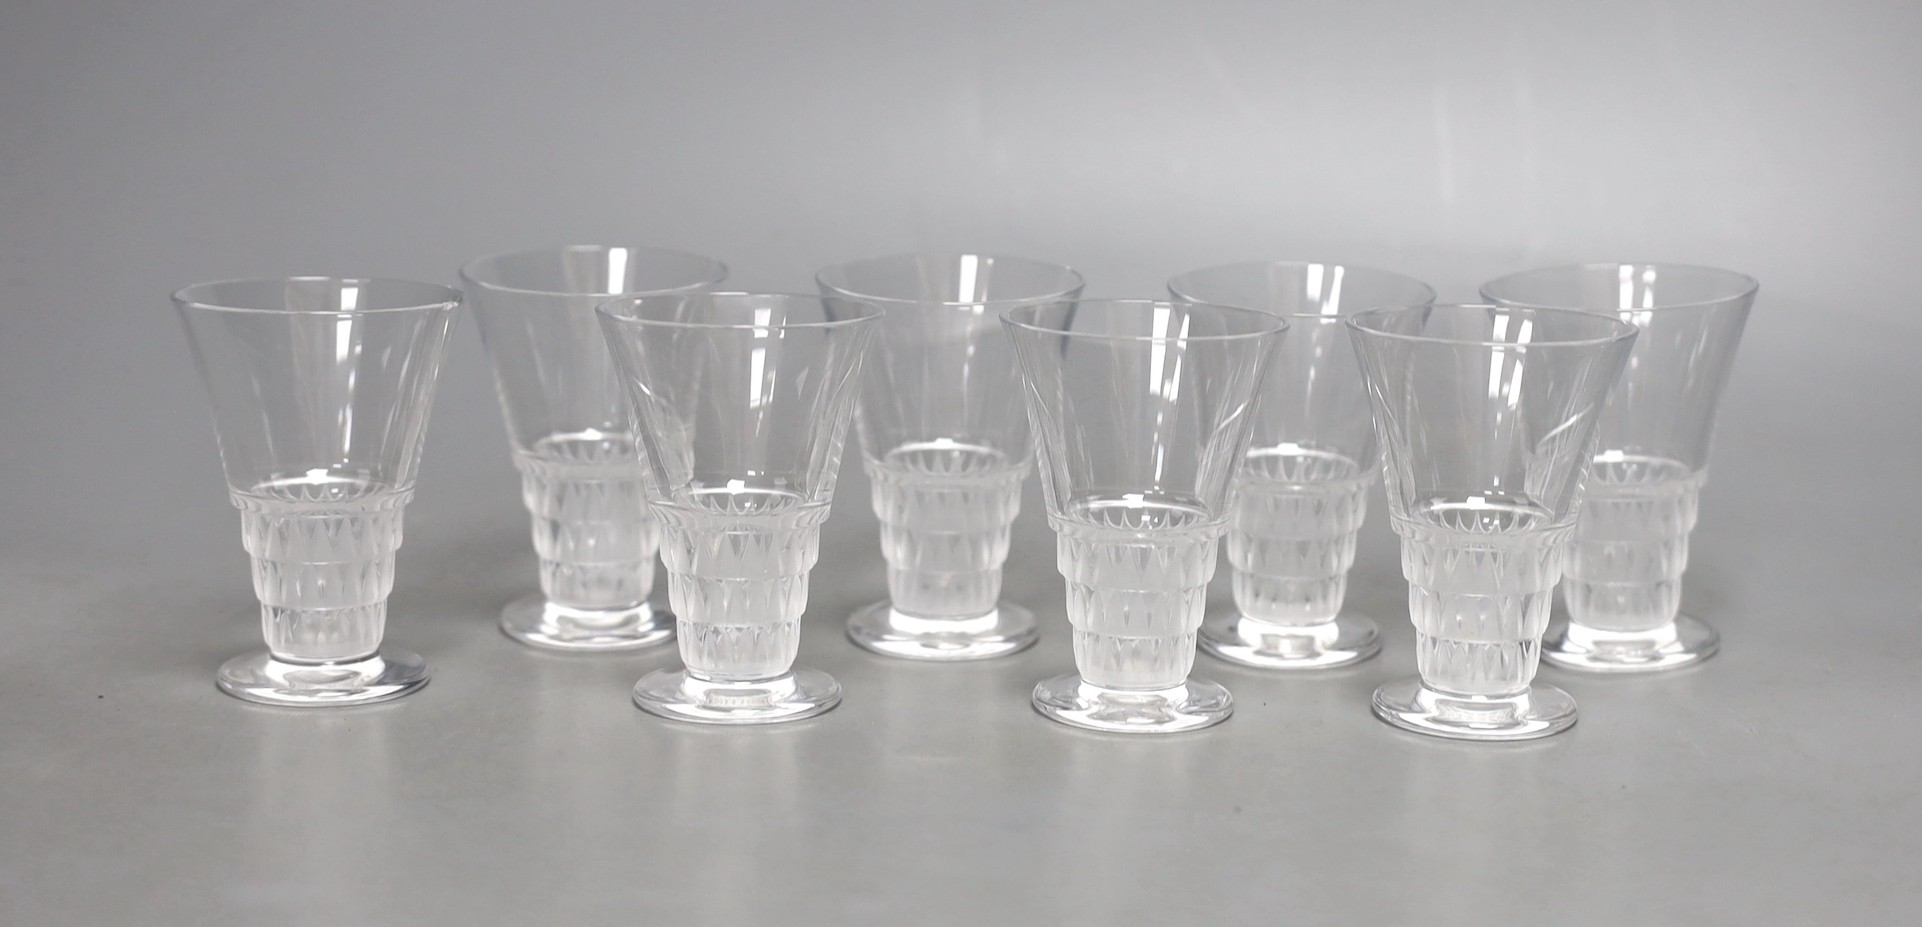 A selection of eight Lalique Bourgueil frosted shot glasses - 7.5cm tall                                                                                                                                                    